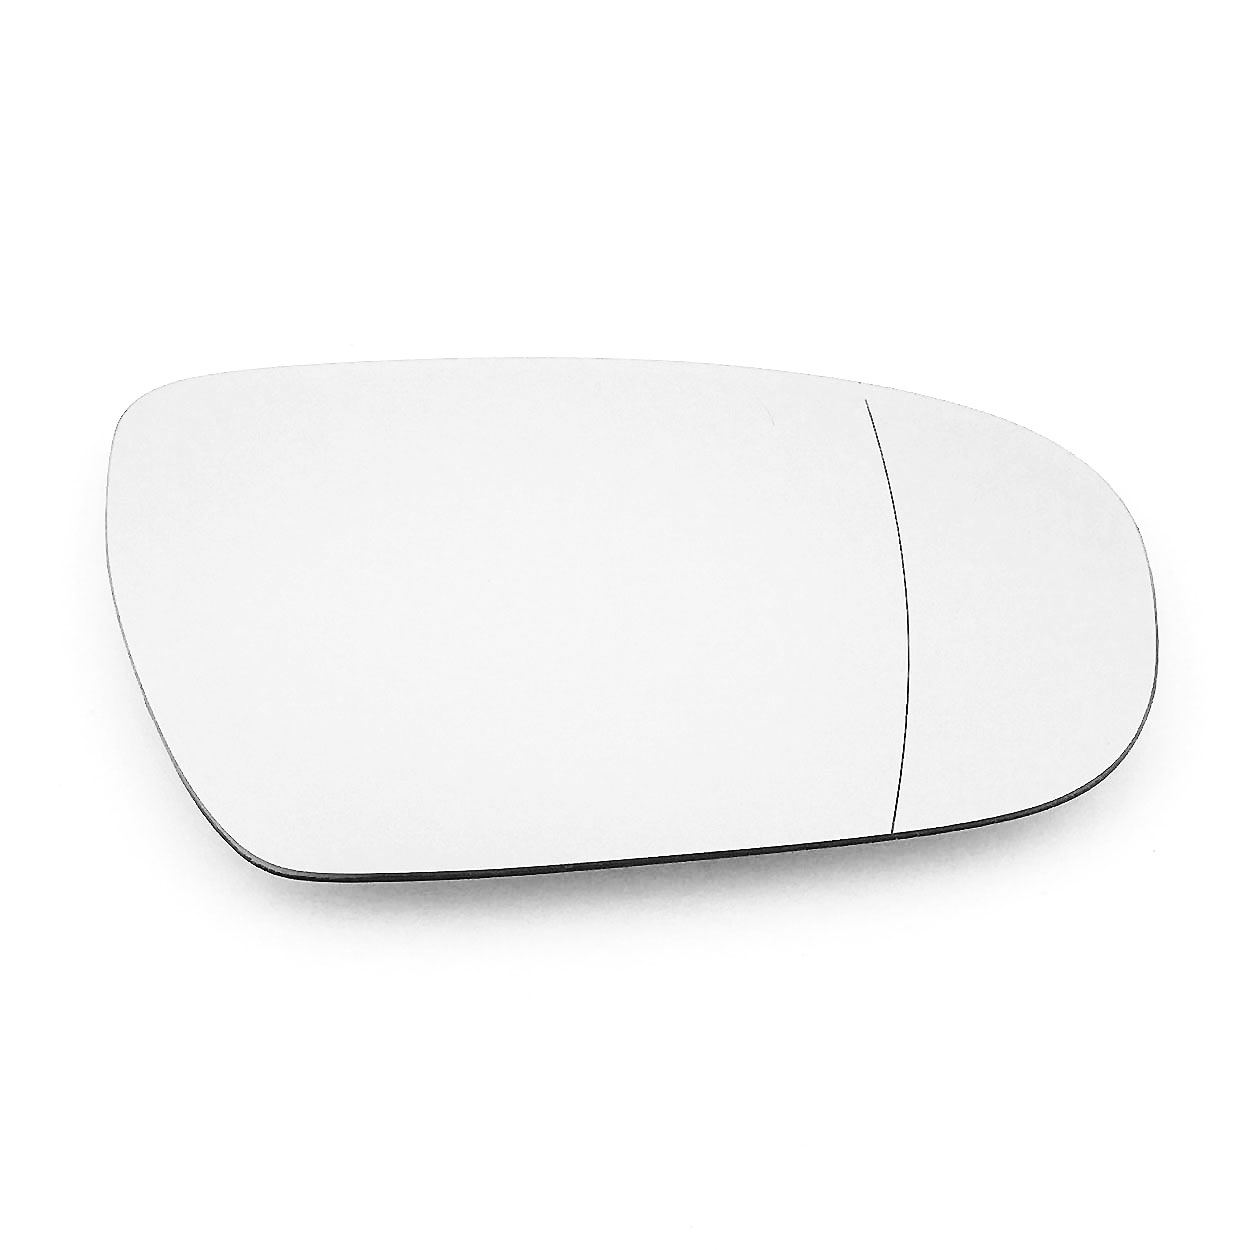 Hyundai I20 Wing Mirror Glass RIGHT HAND ( UK Driver Side ) 2015 to 2018 – Wide angle Wing Mirror